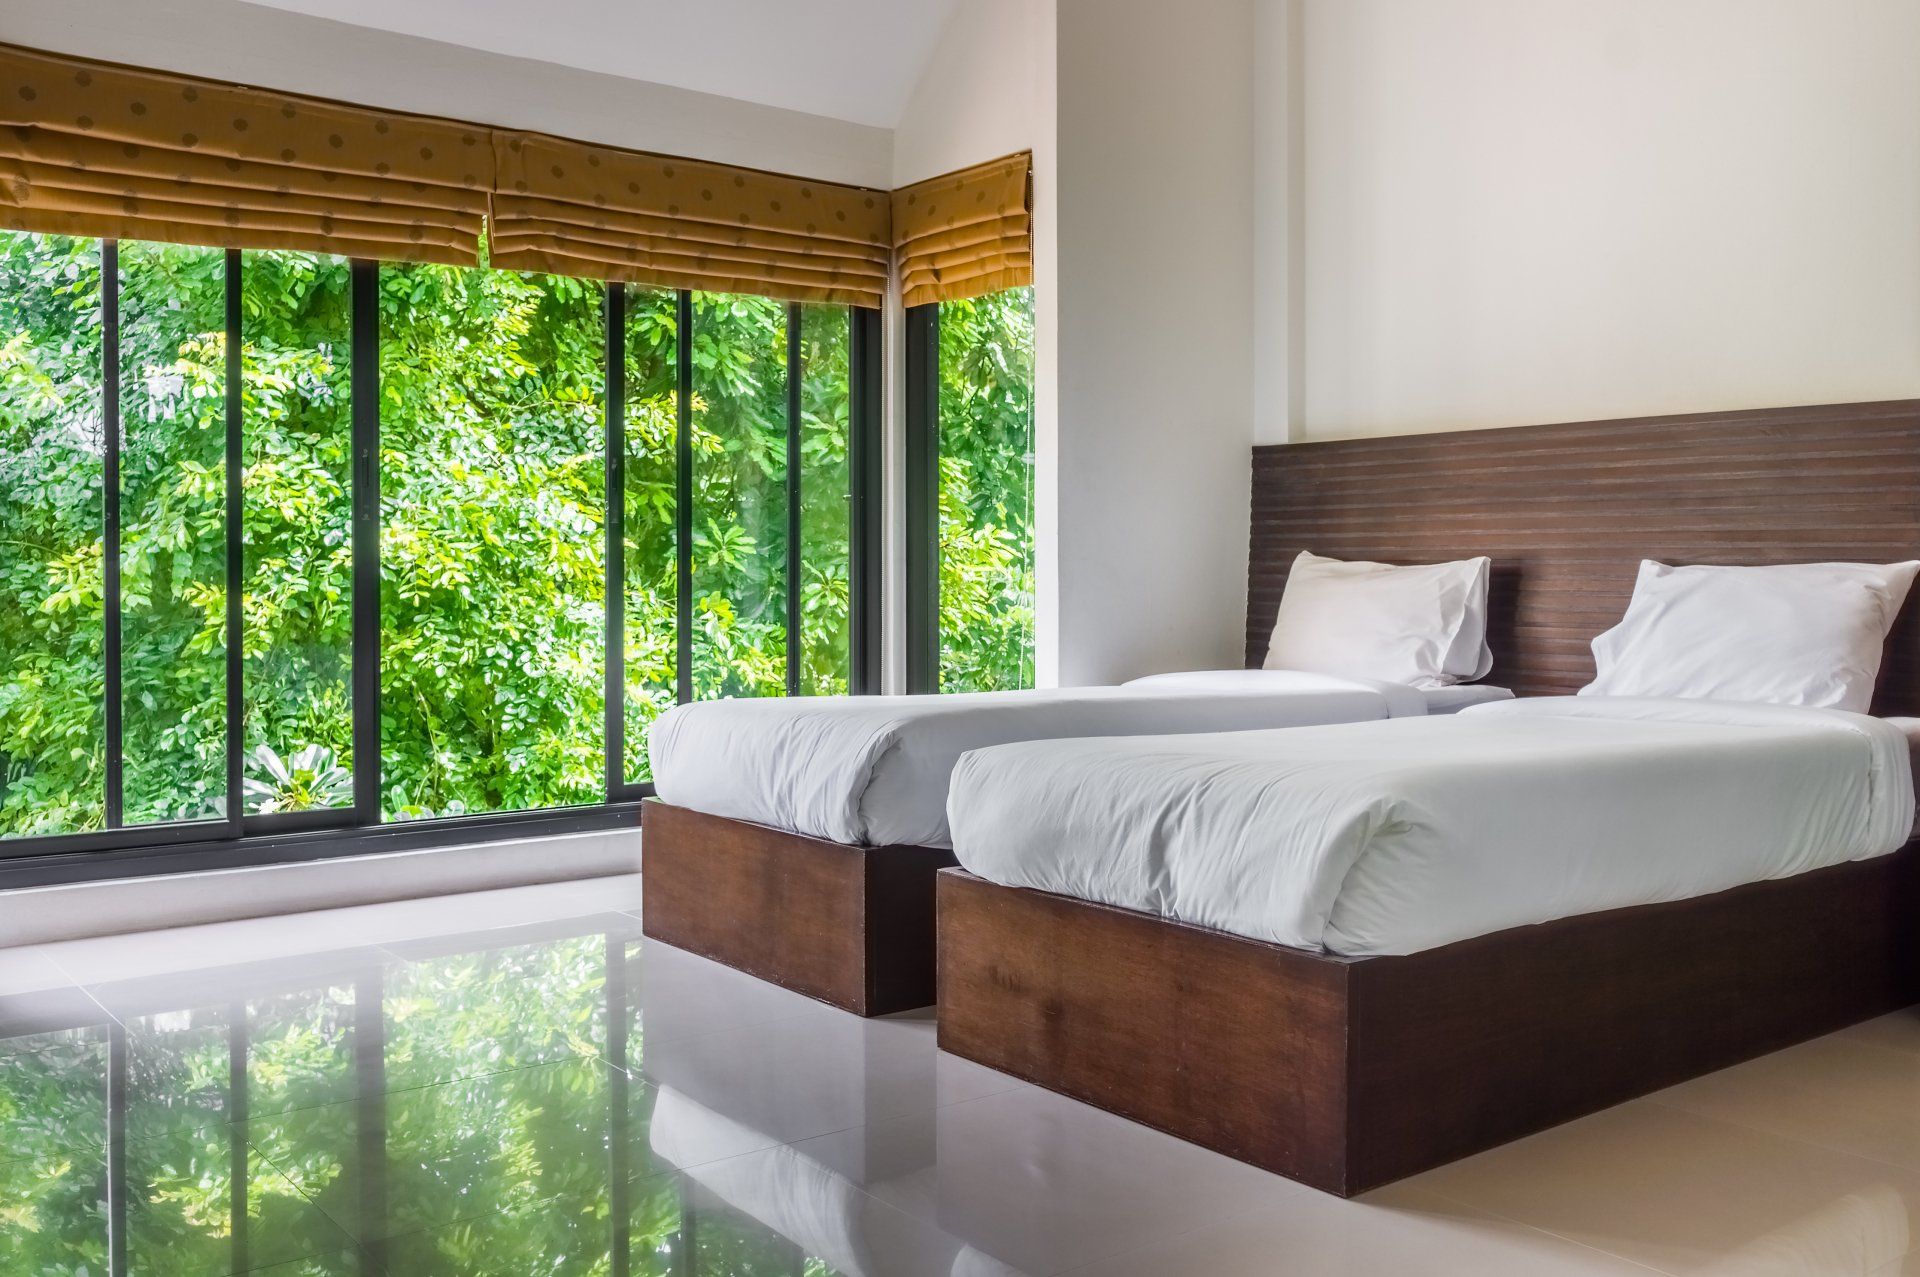 Modern master bedroom with twin beds and wide glass windows. The design to give scenic view of natural outdoor garden.